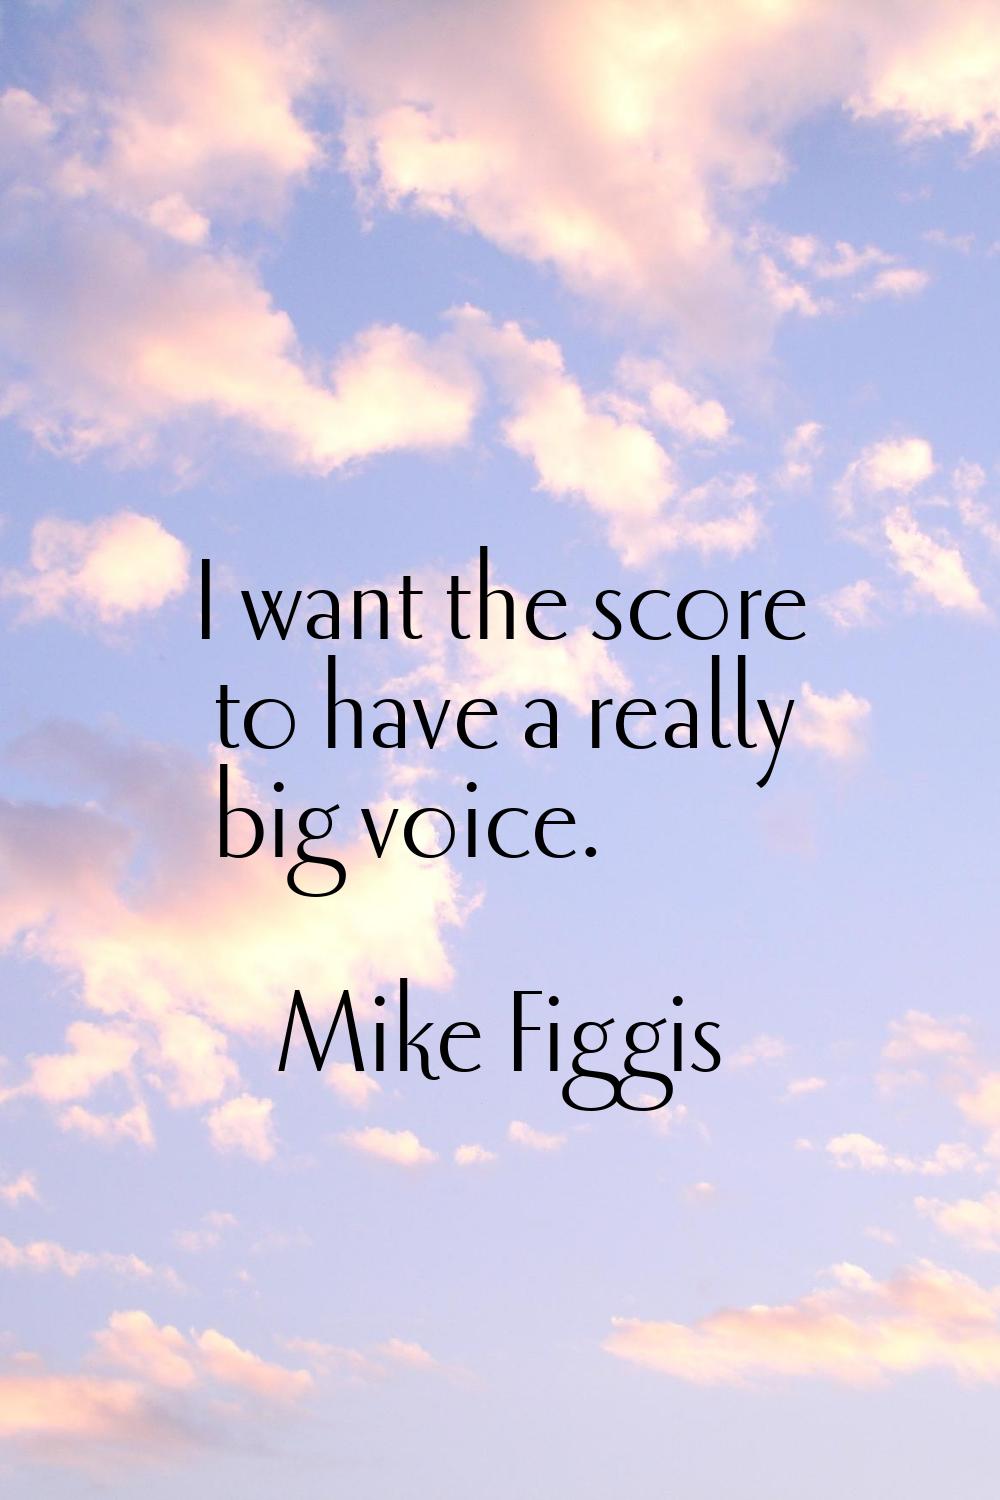 I want the score to have a really big voice.